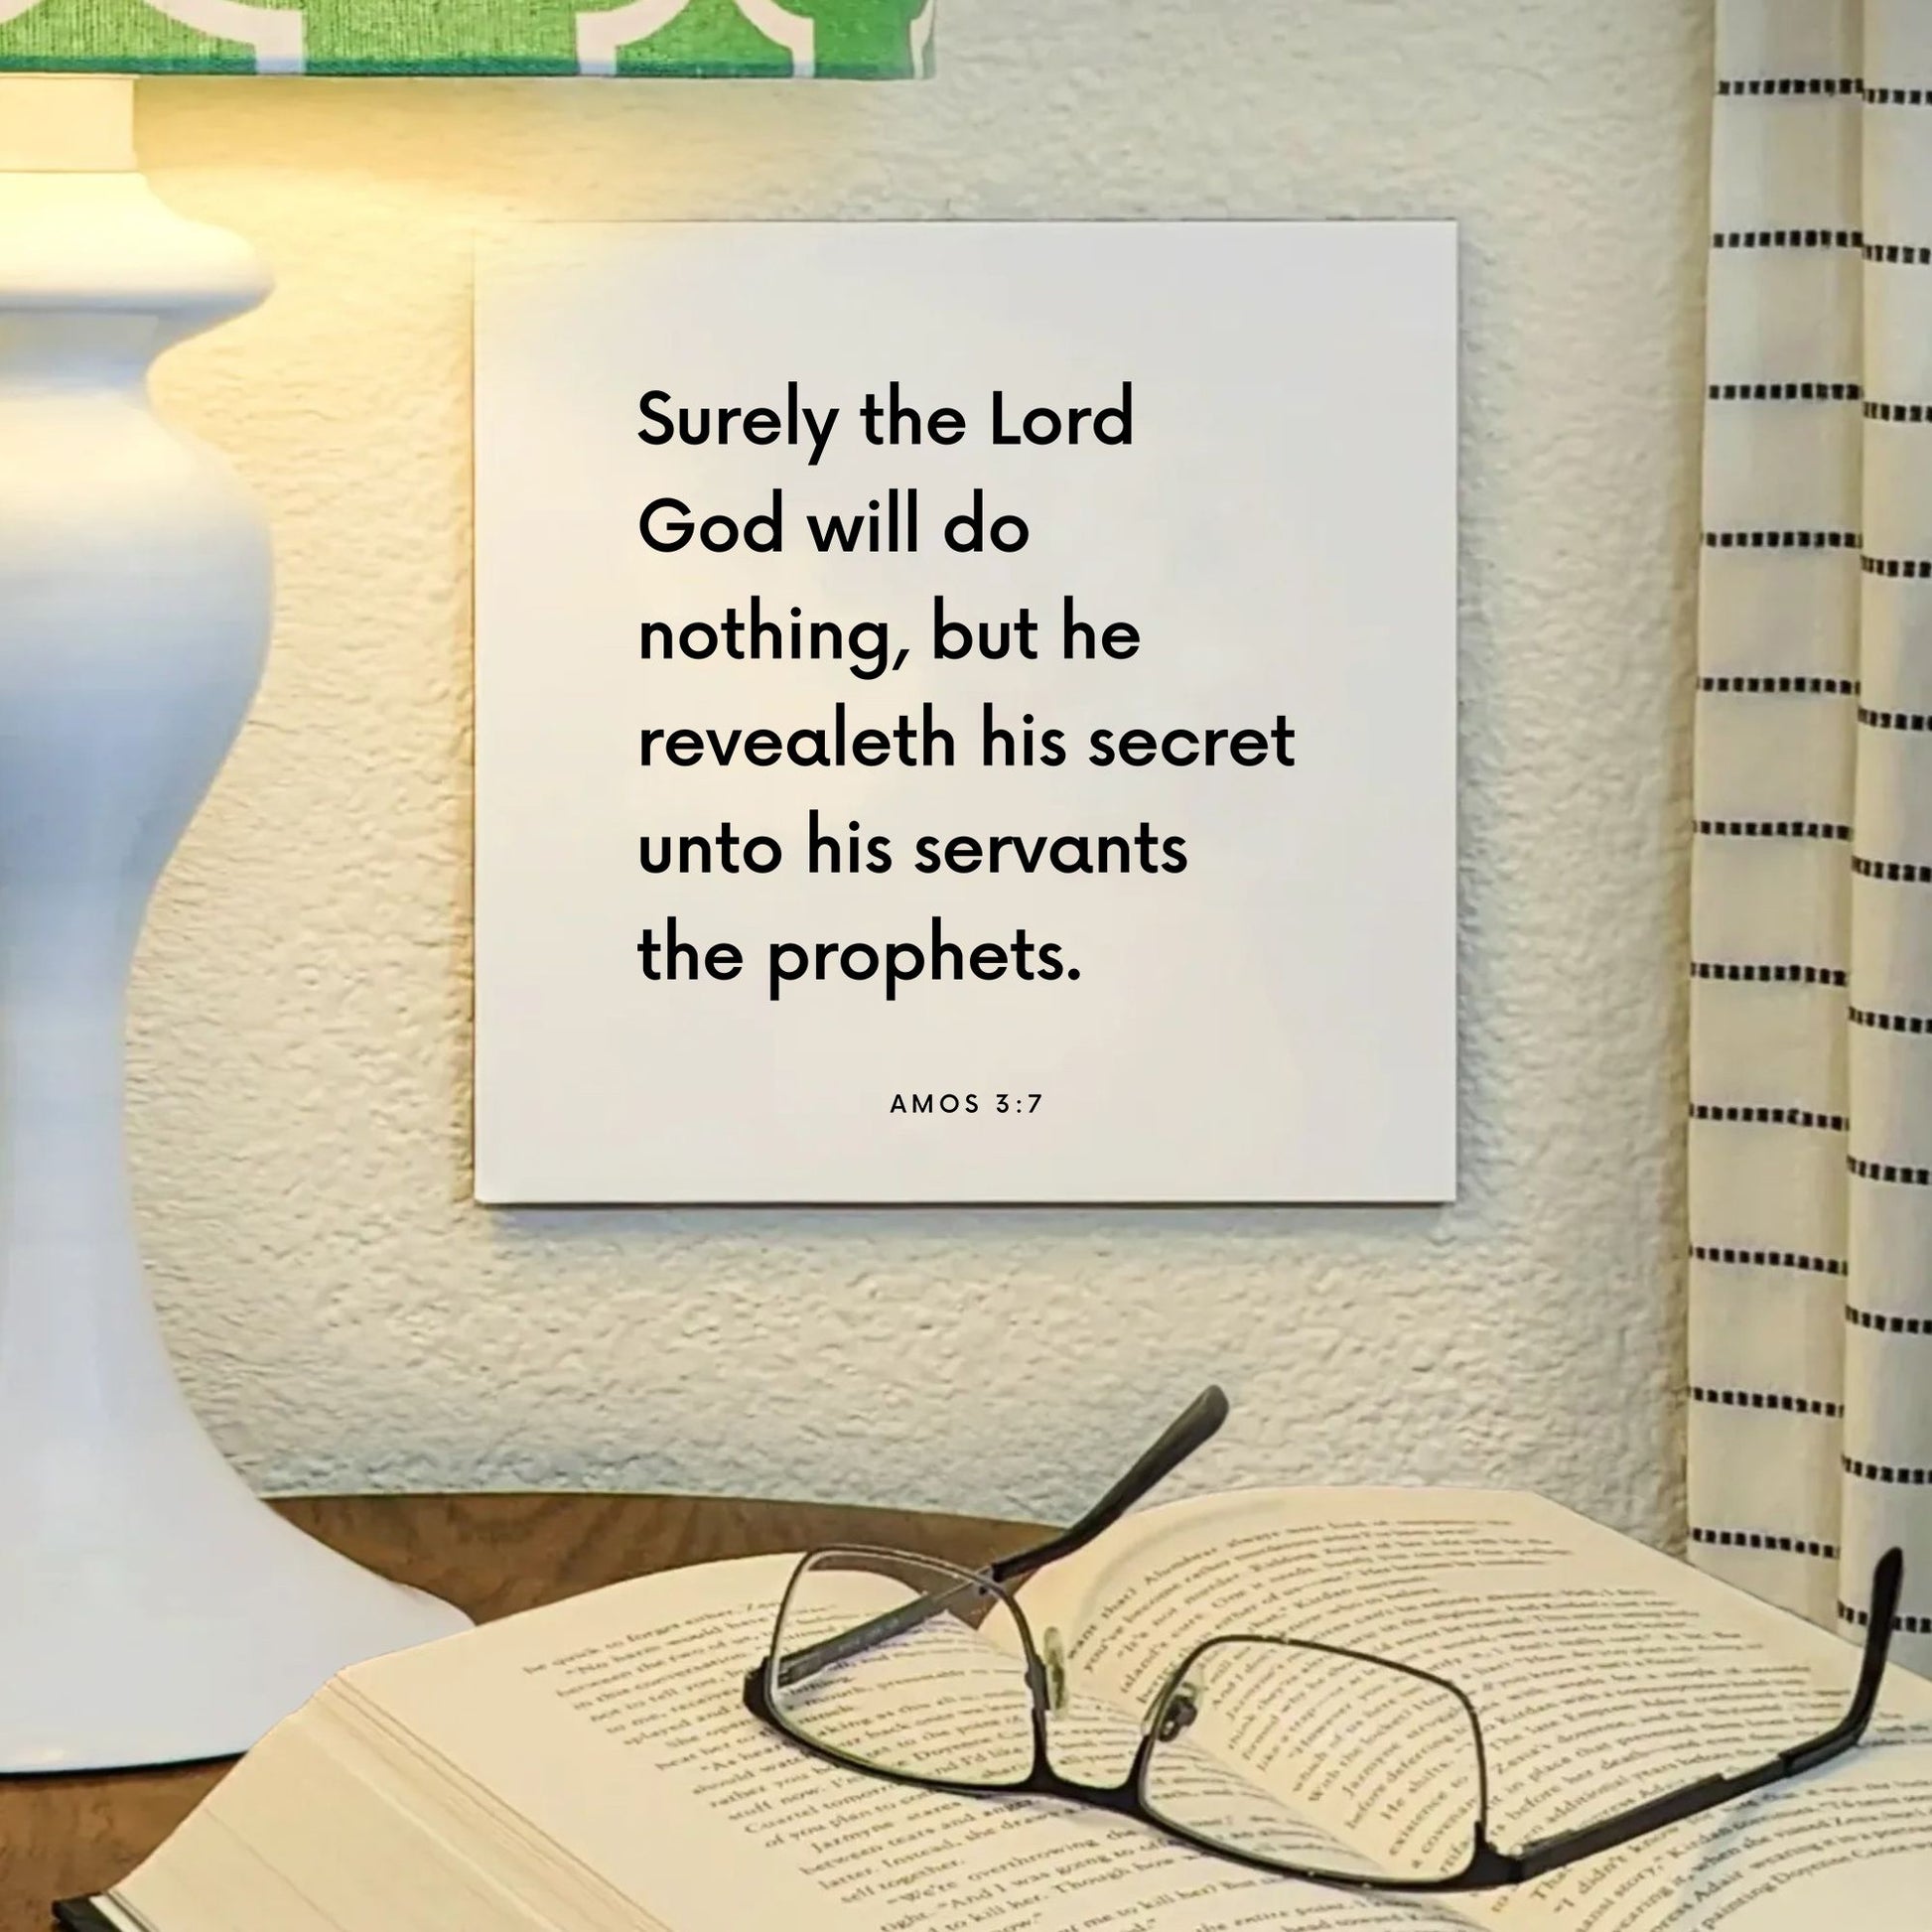 Lamp mouting of the scripture tile for Amos 3:7 - "He revealeth his secret unto his servants the prophets"